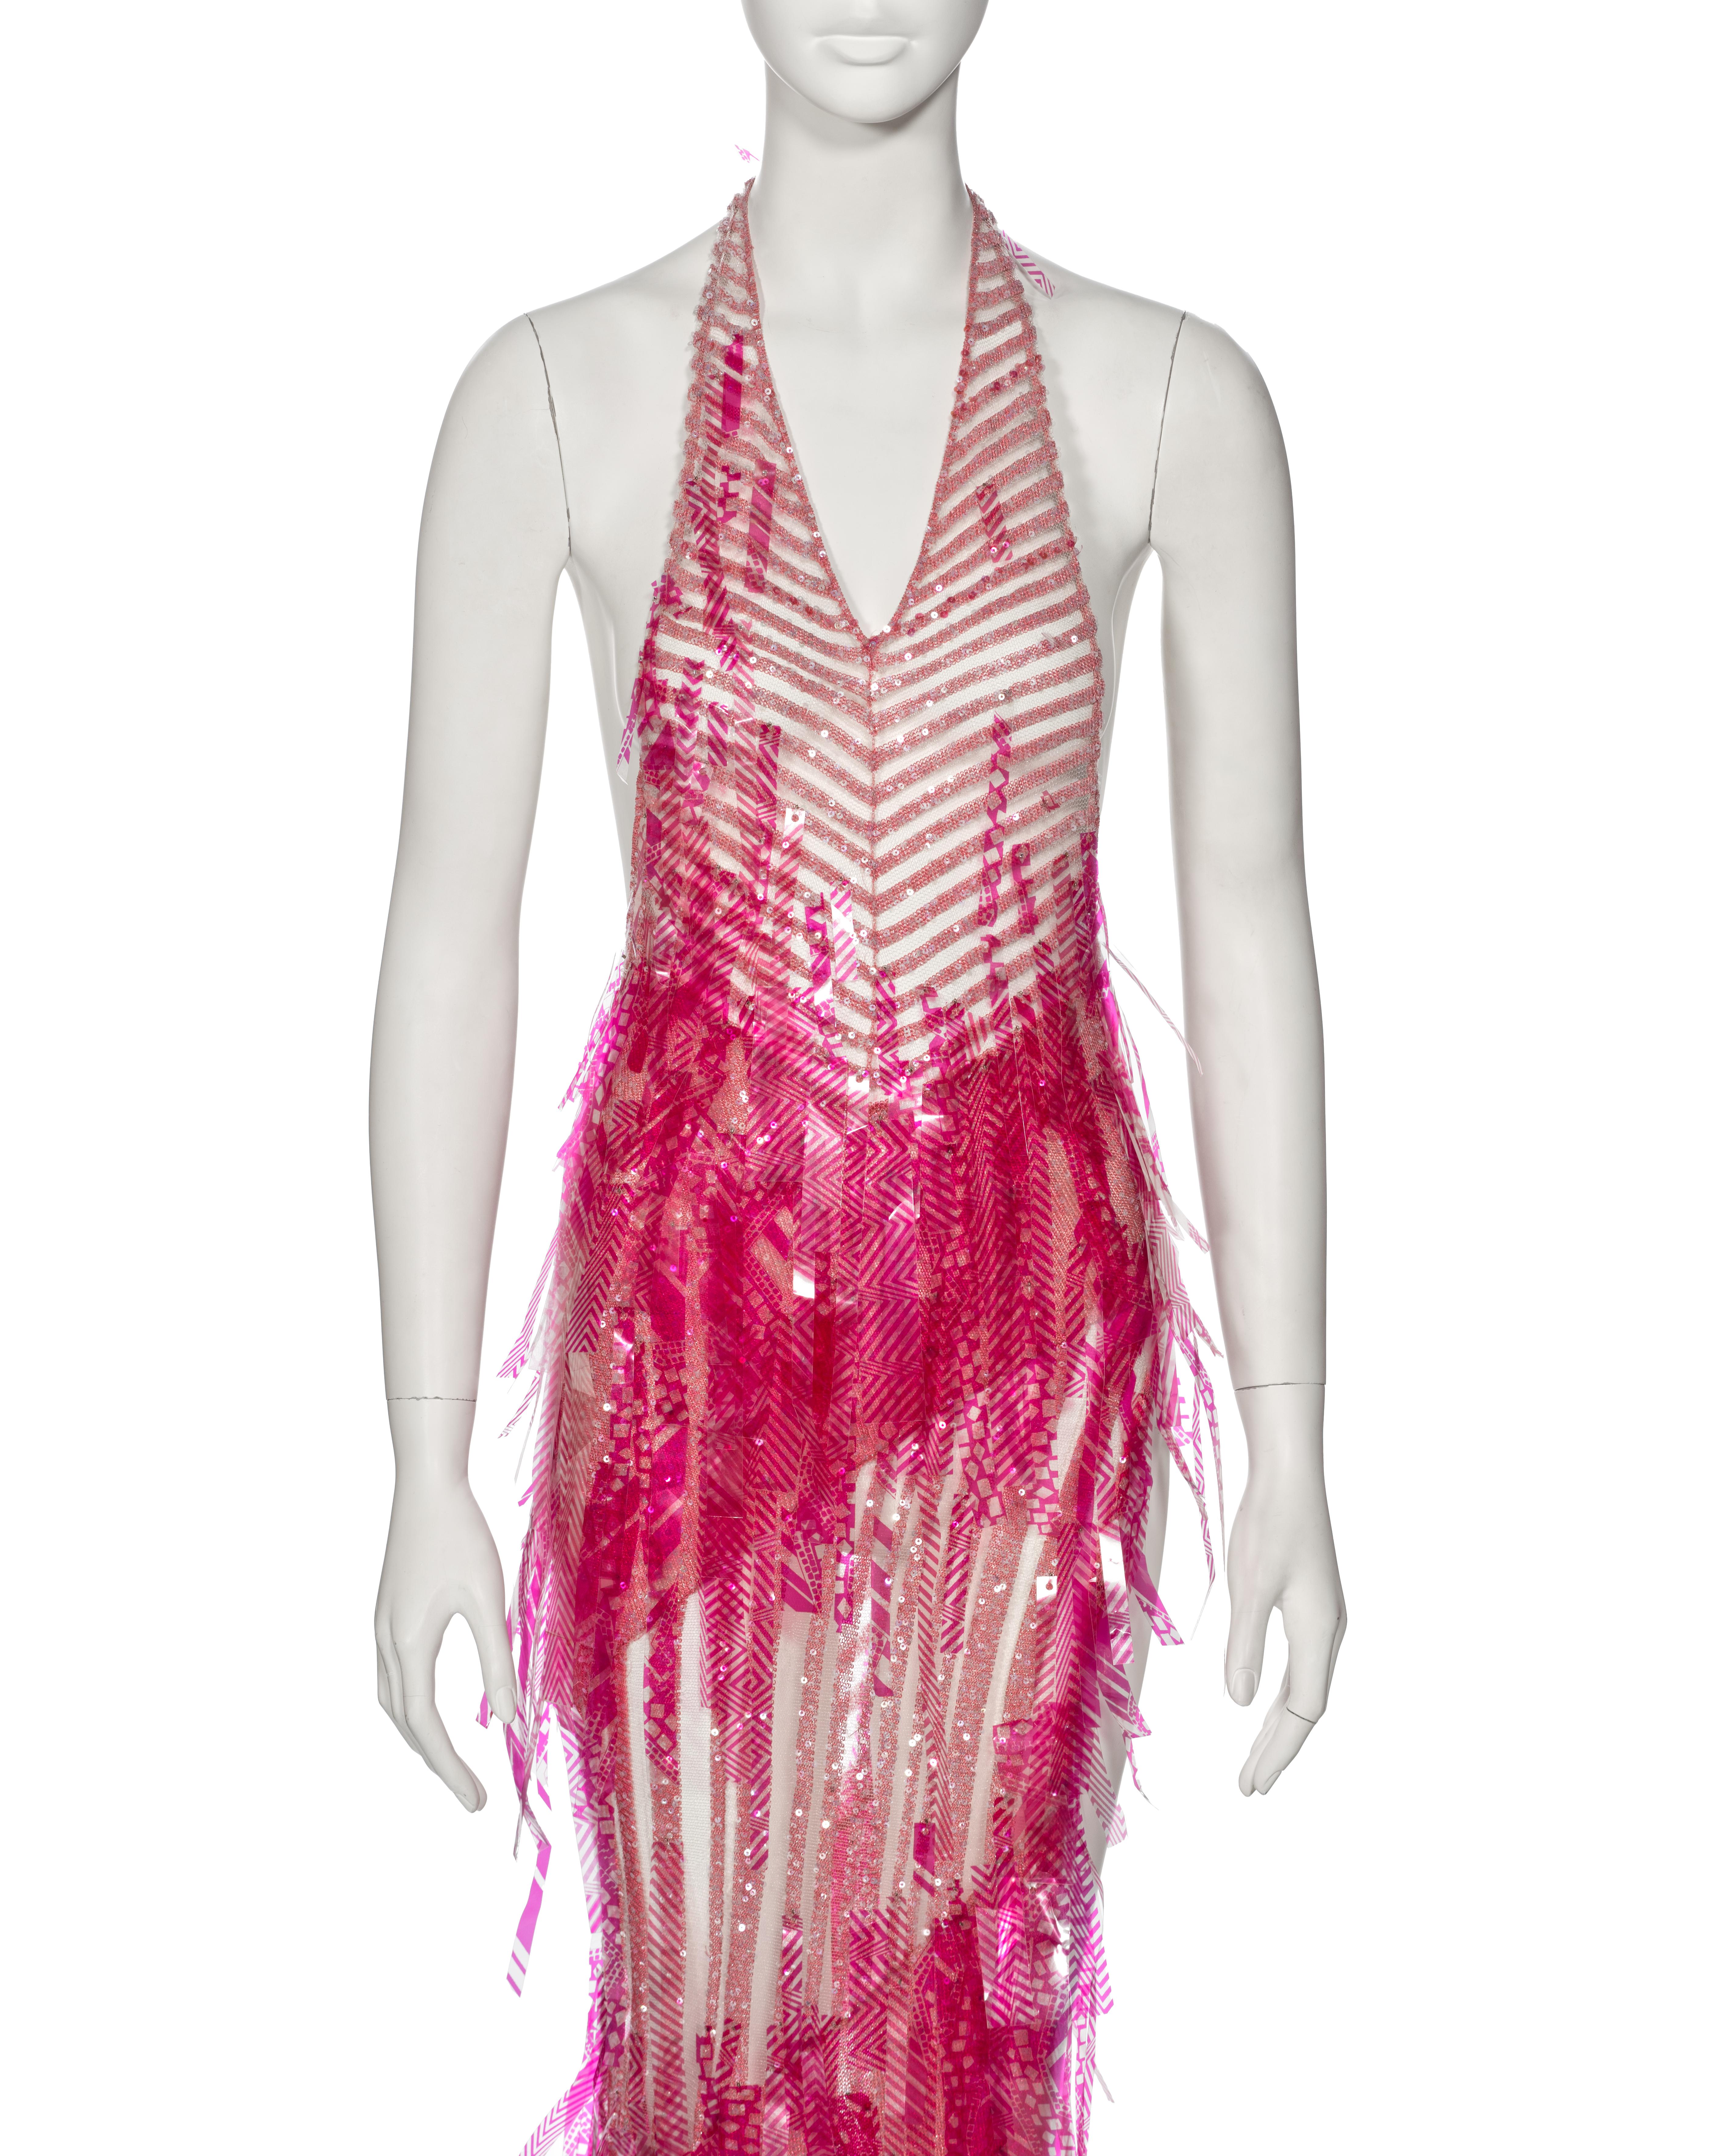 Julien MacDonald Pink Striped Knit Embellished Evening Dress, ss 2002 In Good Condition For Sale In London, GB